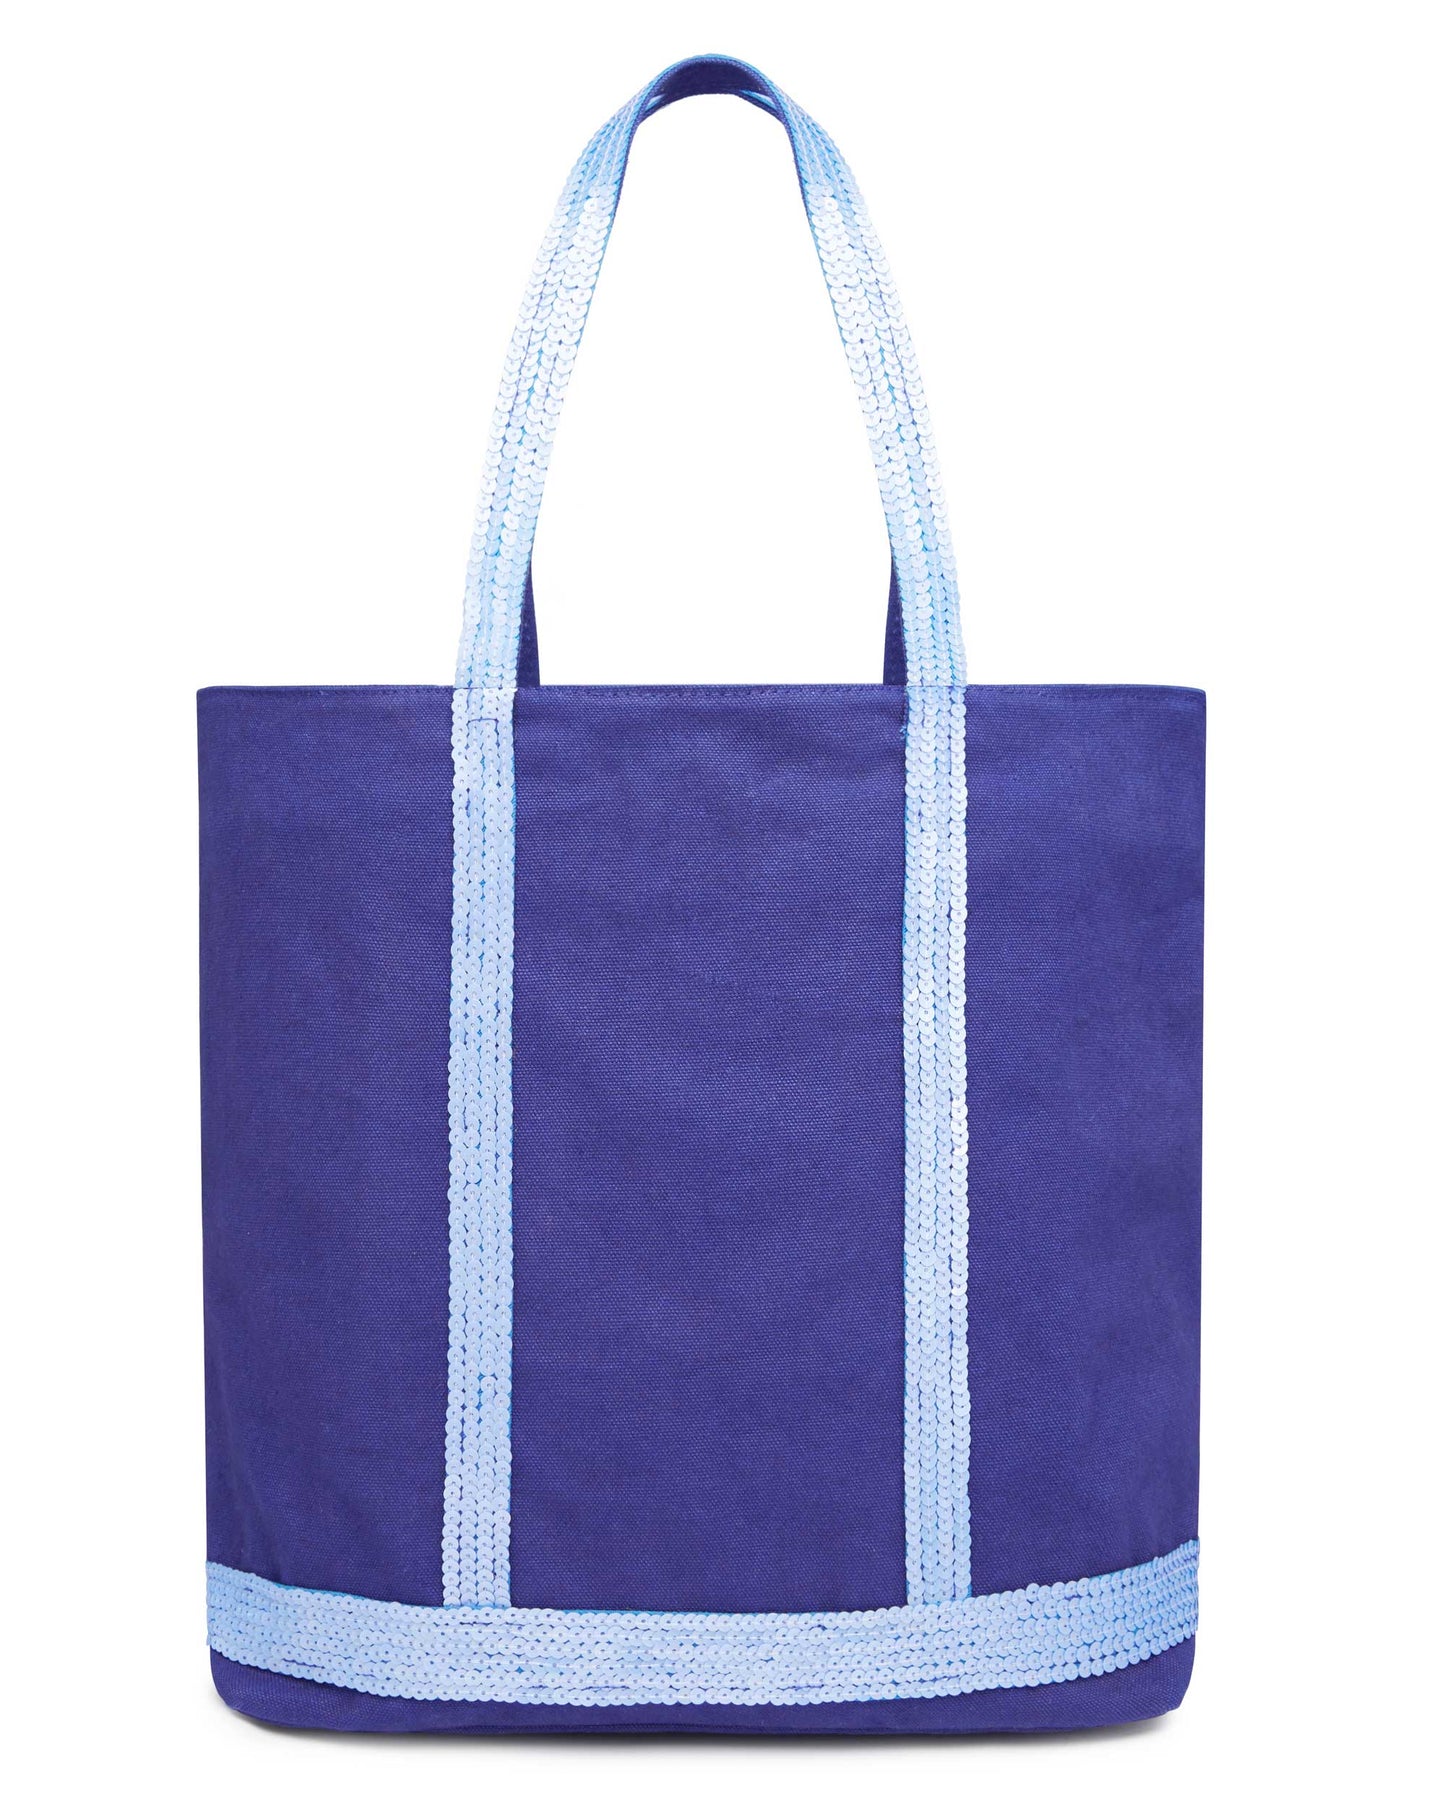 Load image into Gallery viewer, 100% Cotton Canvas Tote Bag - Medium Size Tote Bag
